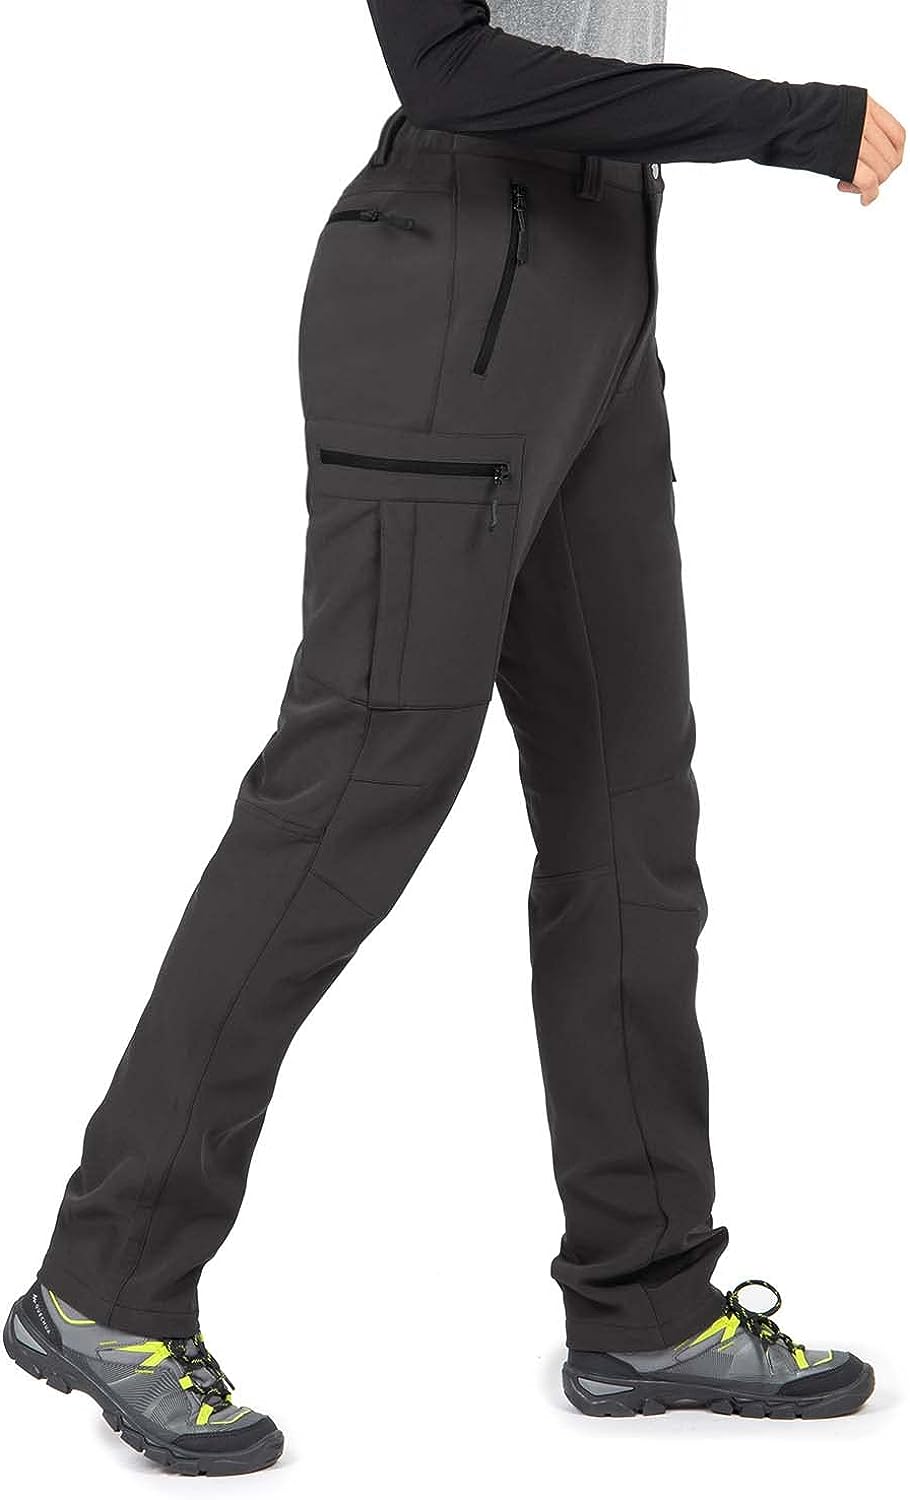 Women's Fleece Lined Hiking Pants Snow Ski Pants Water-Resistance Outdoor Softshell Insulated Pants for Winter